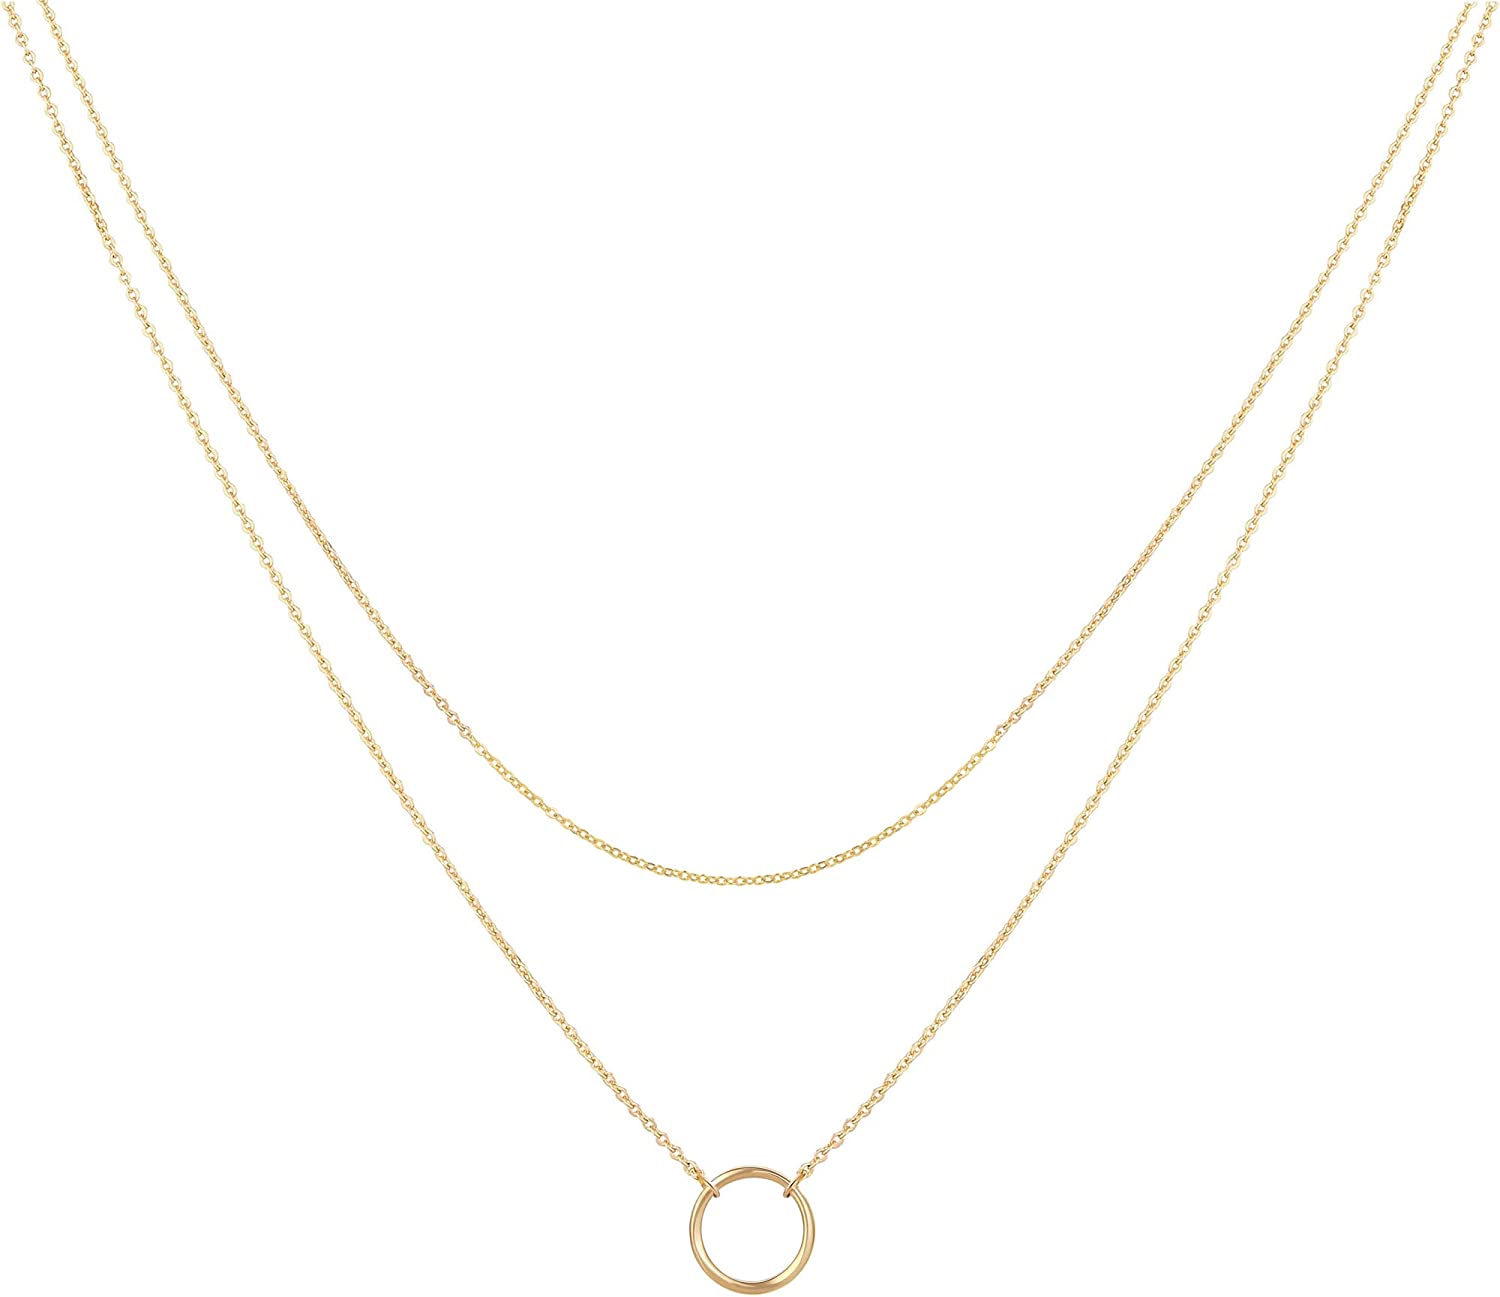 Ldurian Layered Necklaces for Women - 14K Dainty Gold Plated Layering  Chokers Necklaces Set Multilayer Delicate Necklace Trendy Adjustable Long